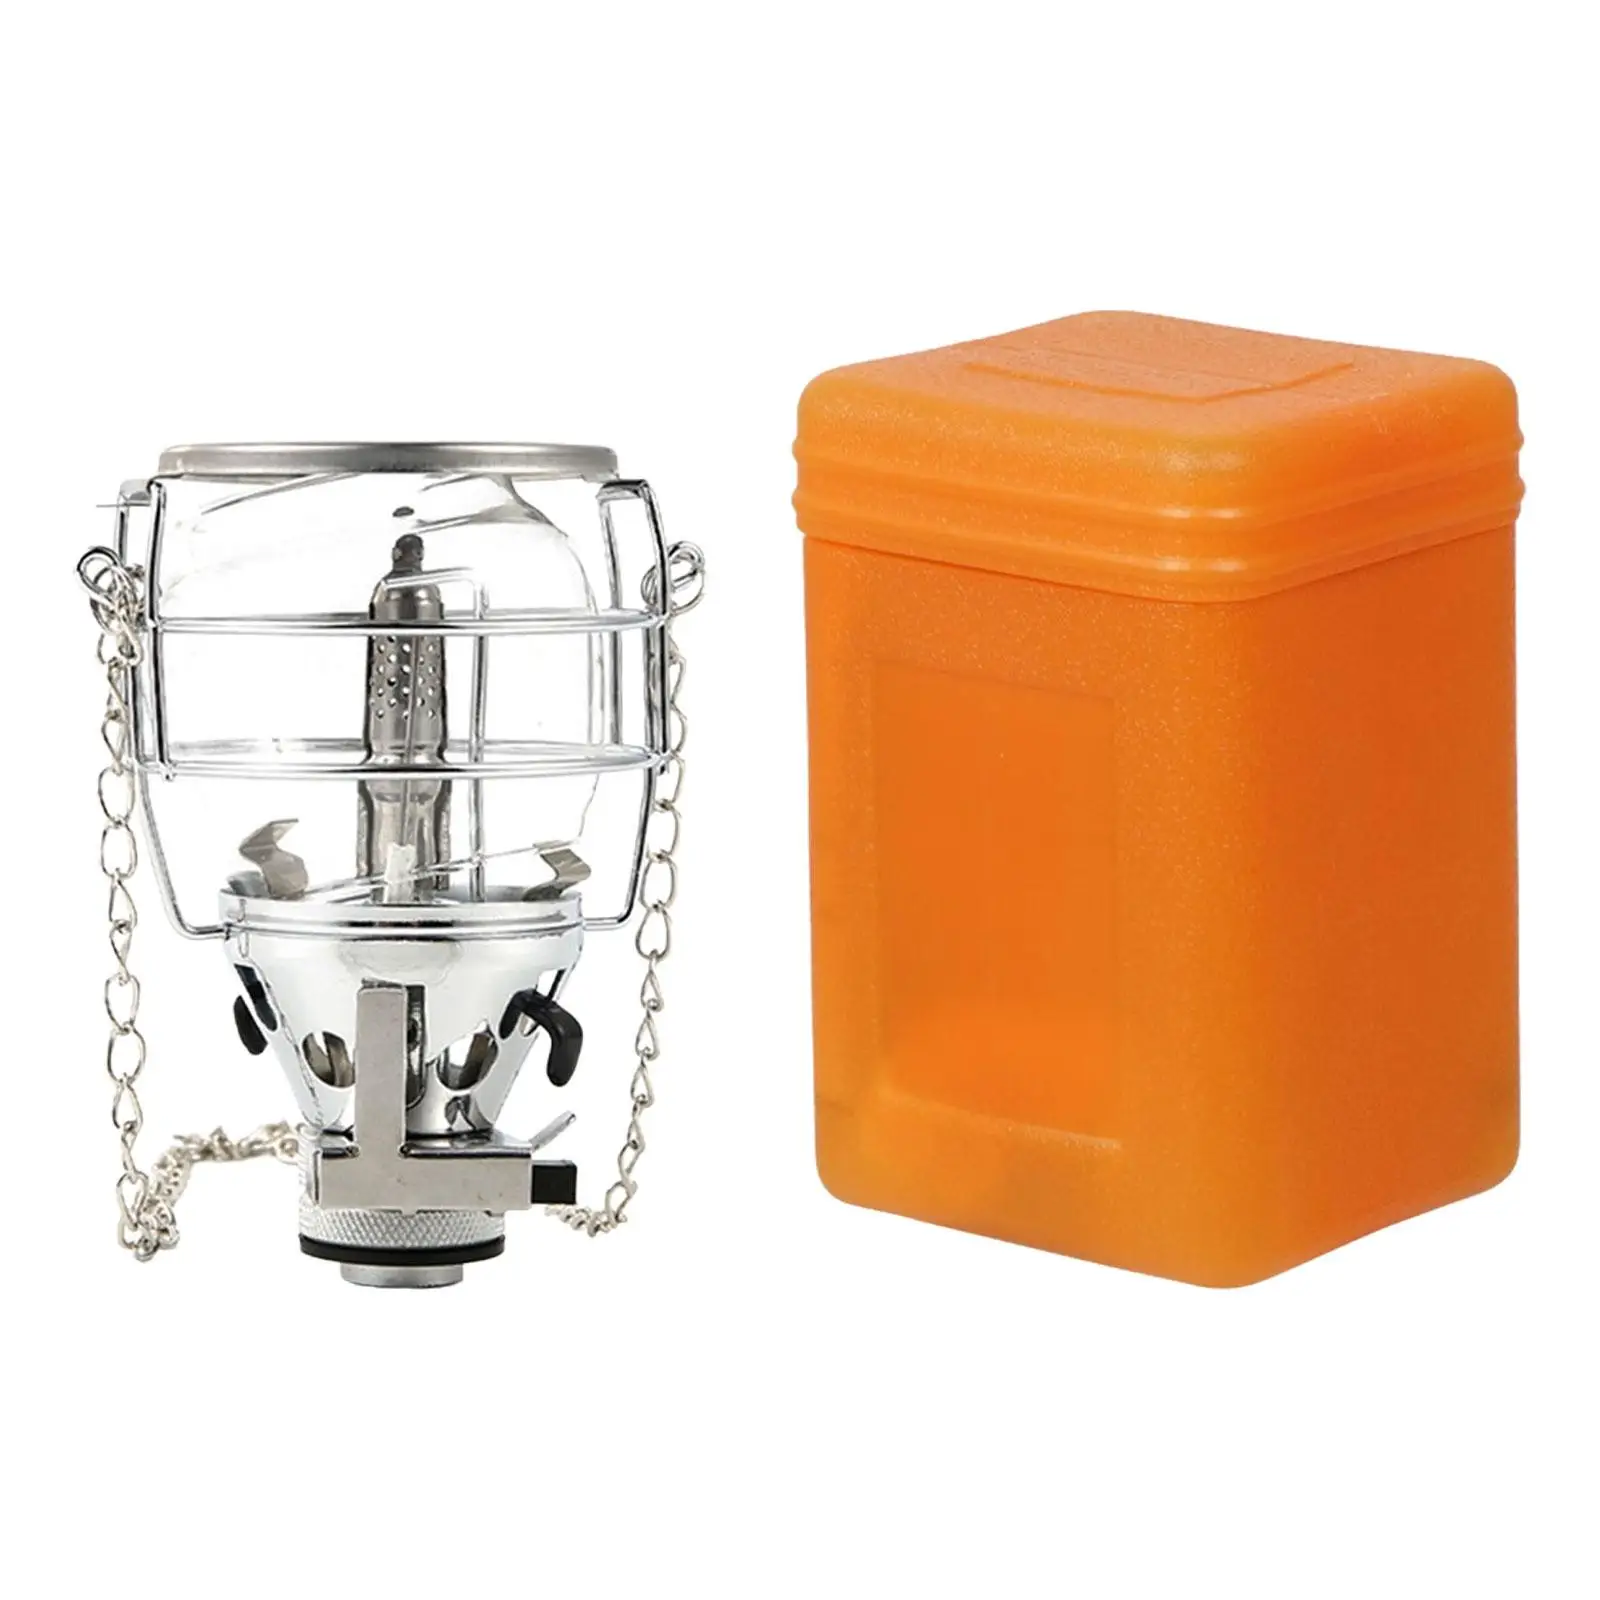 Compact Gas Lantern Fuel Lamp with Storage Case Hanging Torch Camping Light Tent Lantern for Picnic Backpacking Travel Hiking